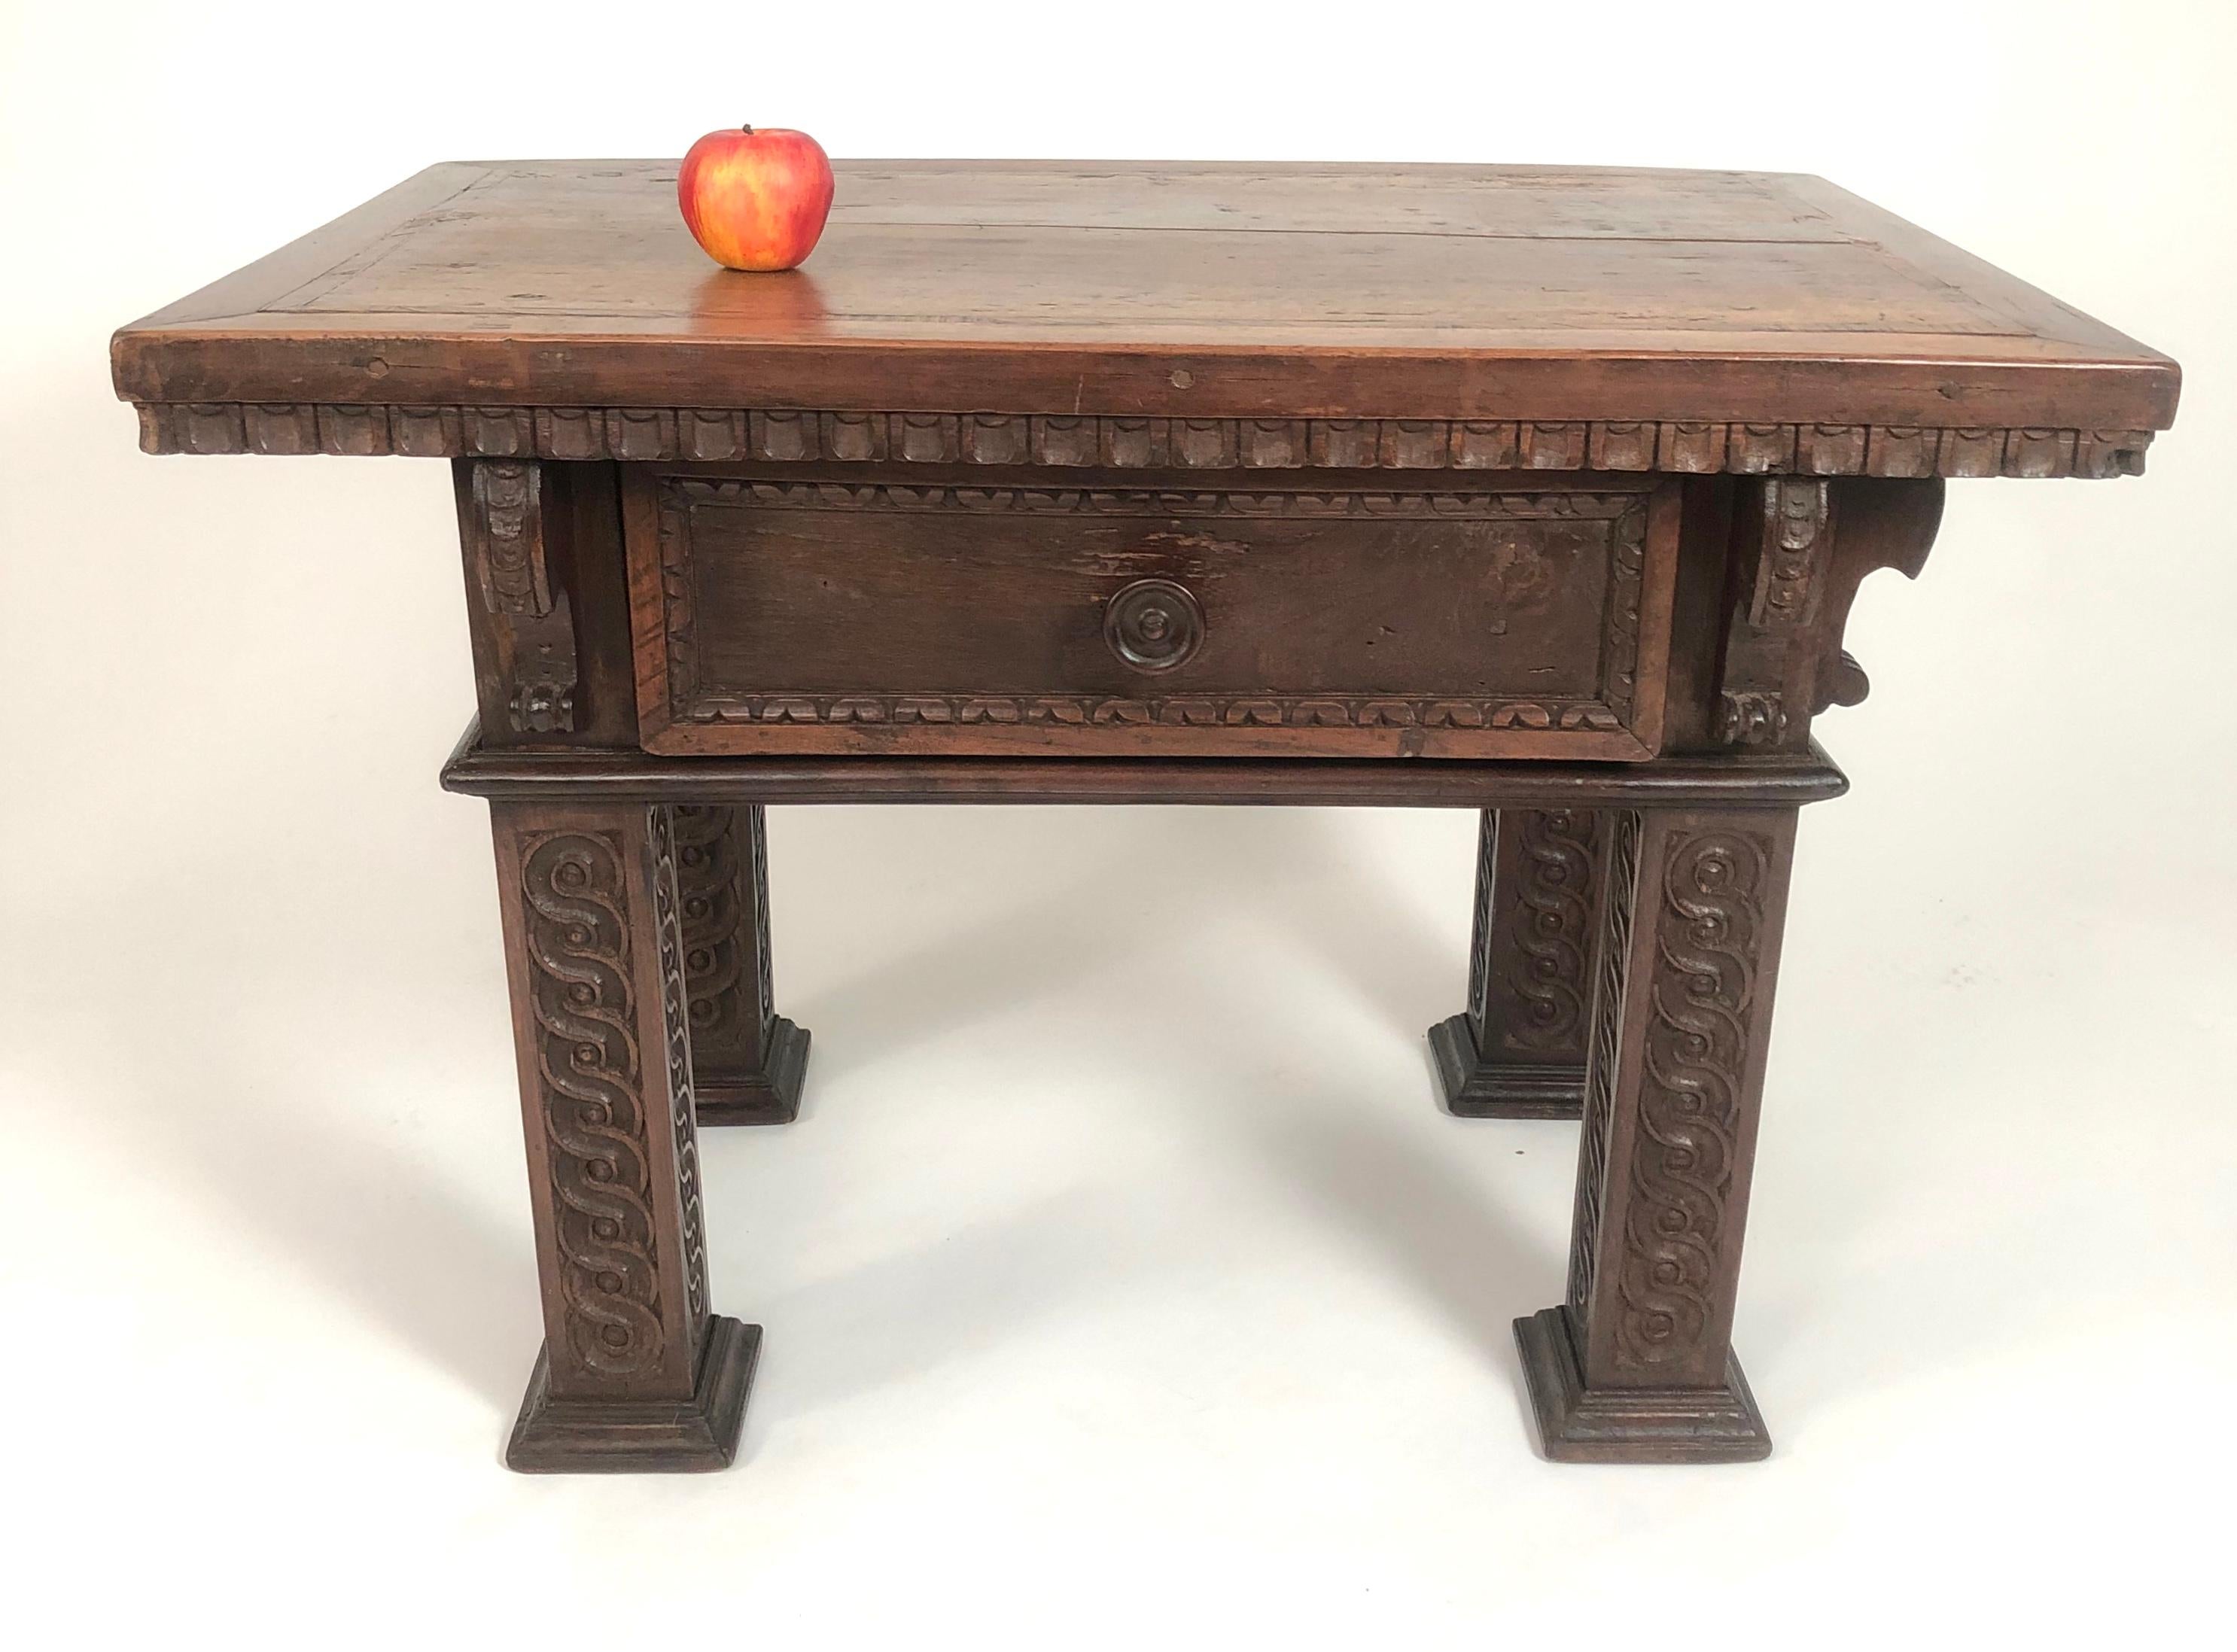 Hand-Carved Italian Renaissance Revival Carved Oak and Walnut Side or Coffee Table